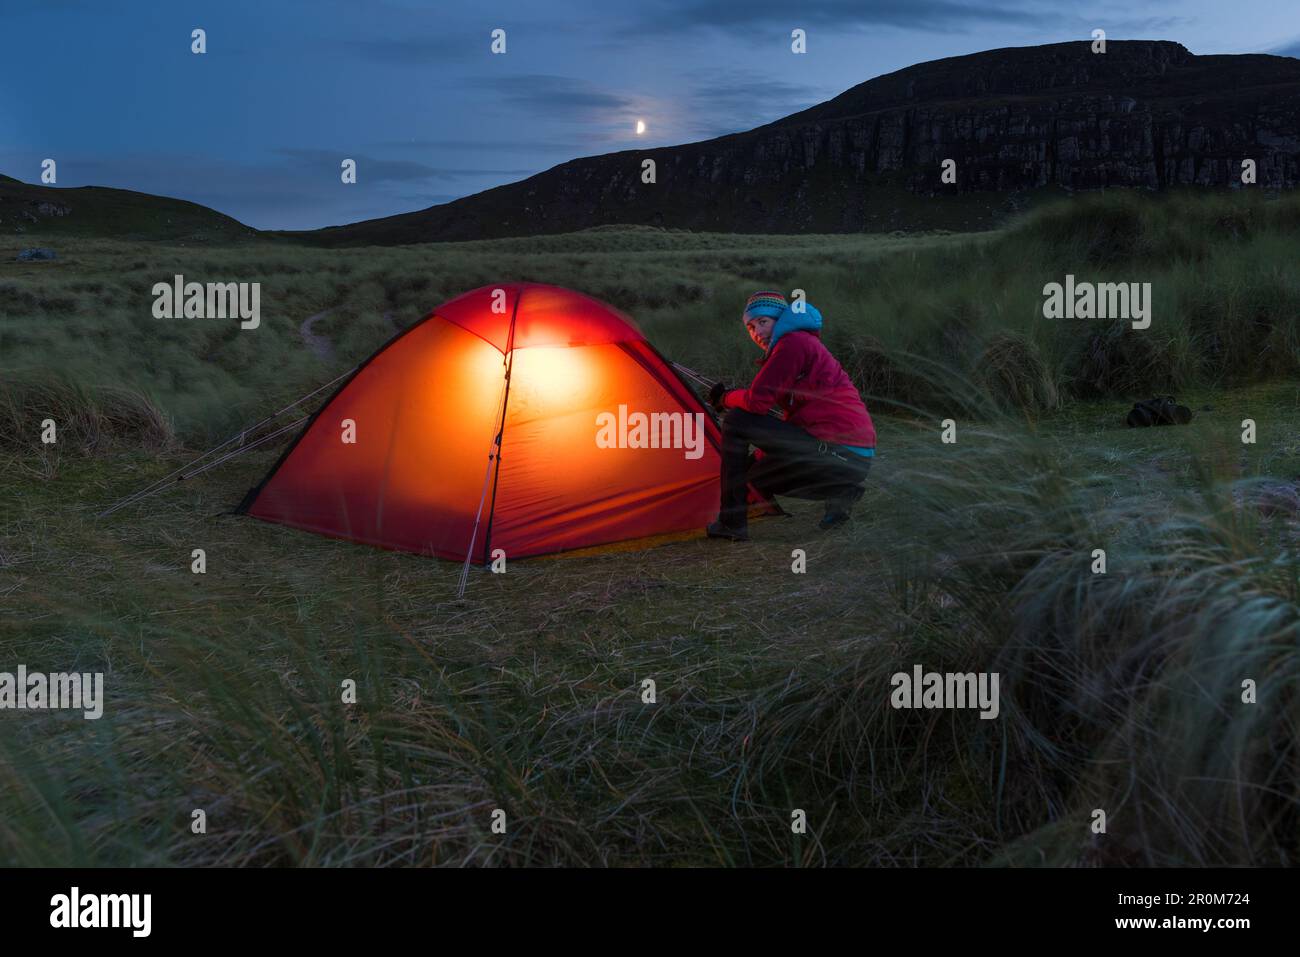 A woman in front of lit tent, Sandwood Bay, Highlands, Scotland, UK Stock Photo